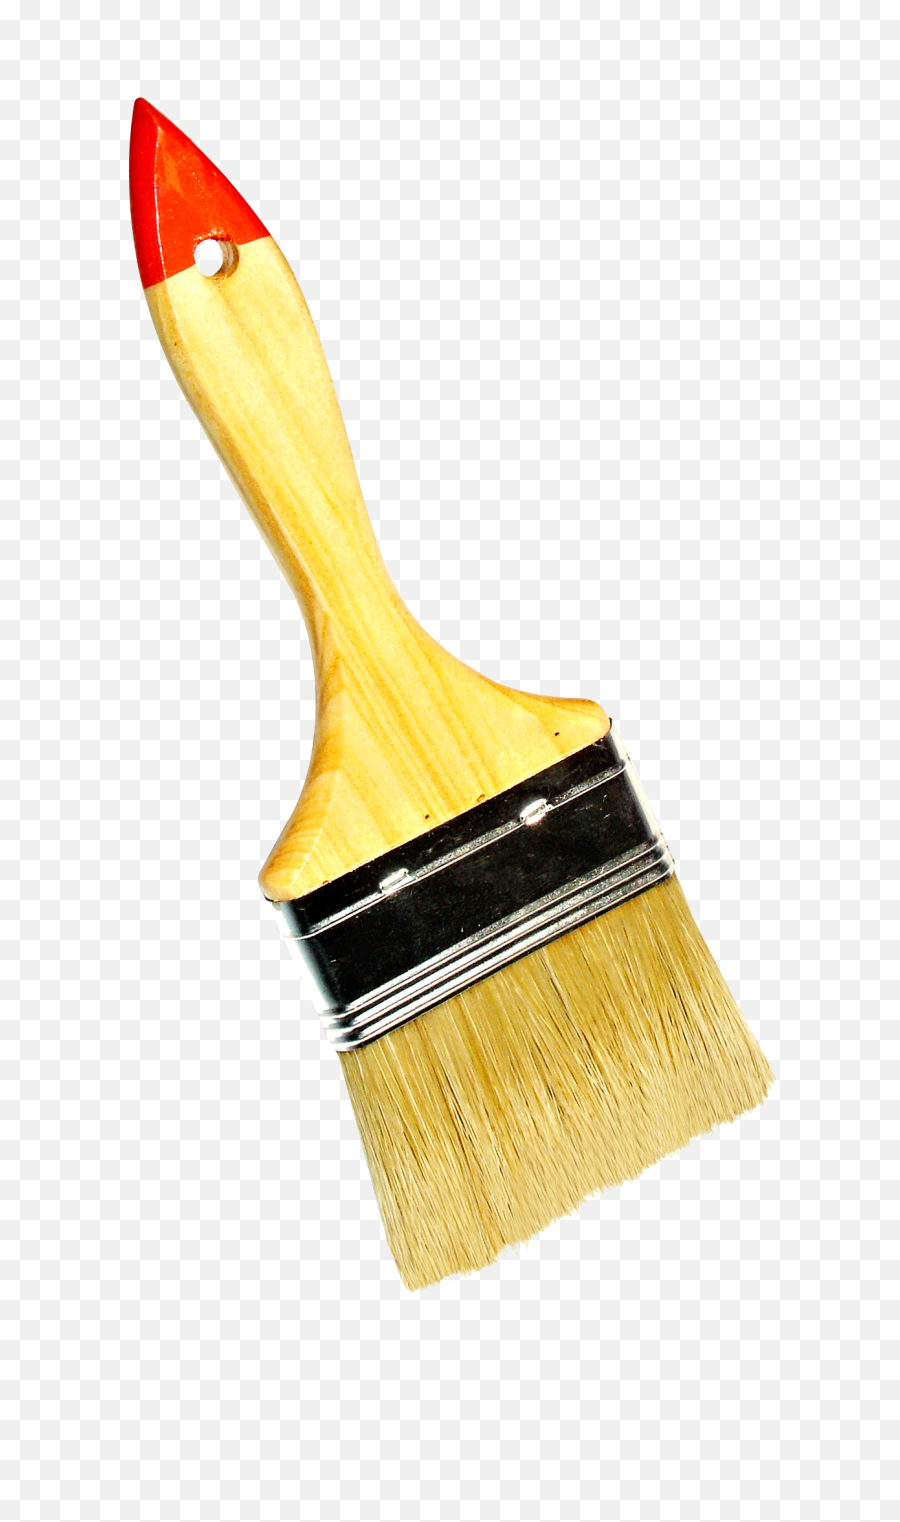 Paint Brush Hd Png Images Brushes Pencil Strokes - Free Painting Brush Png,Paint Stroke Png